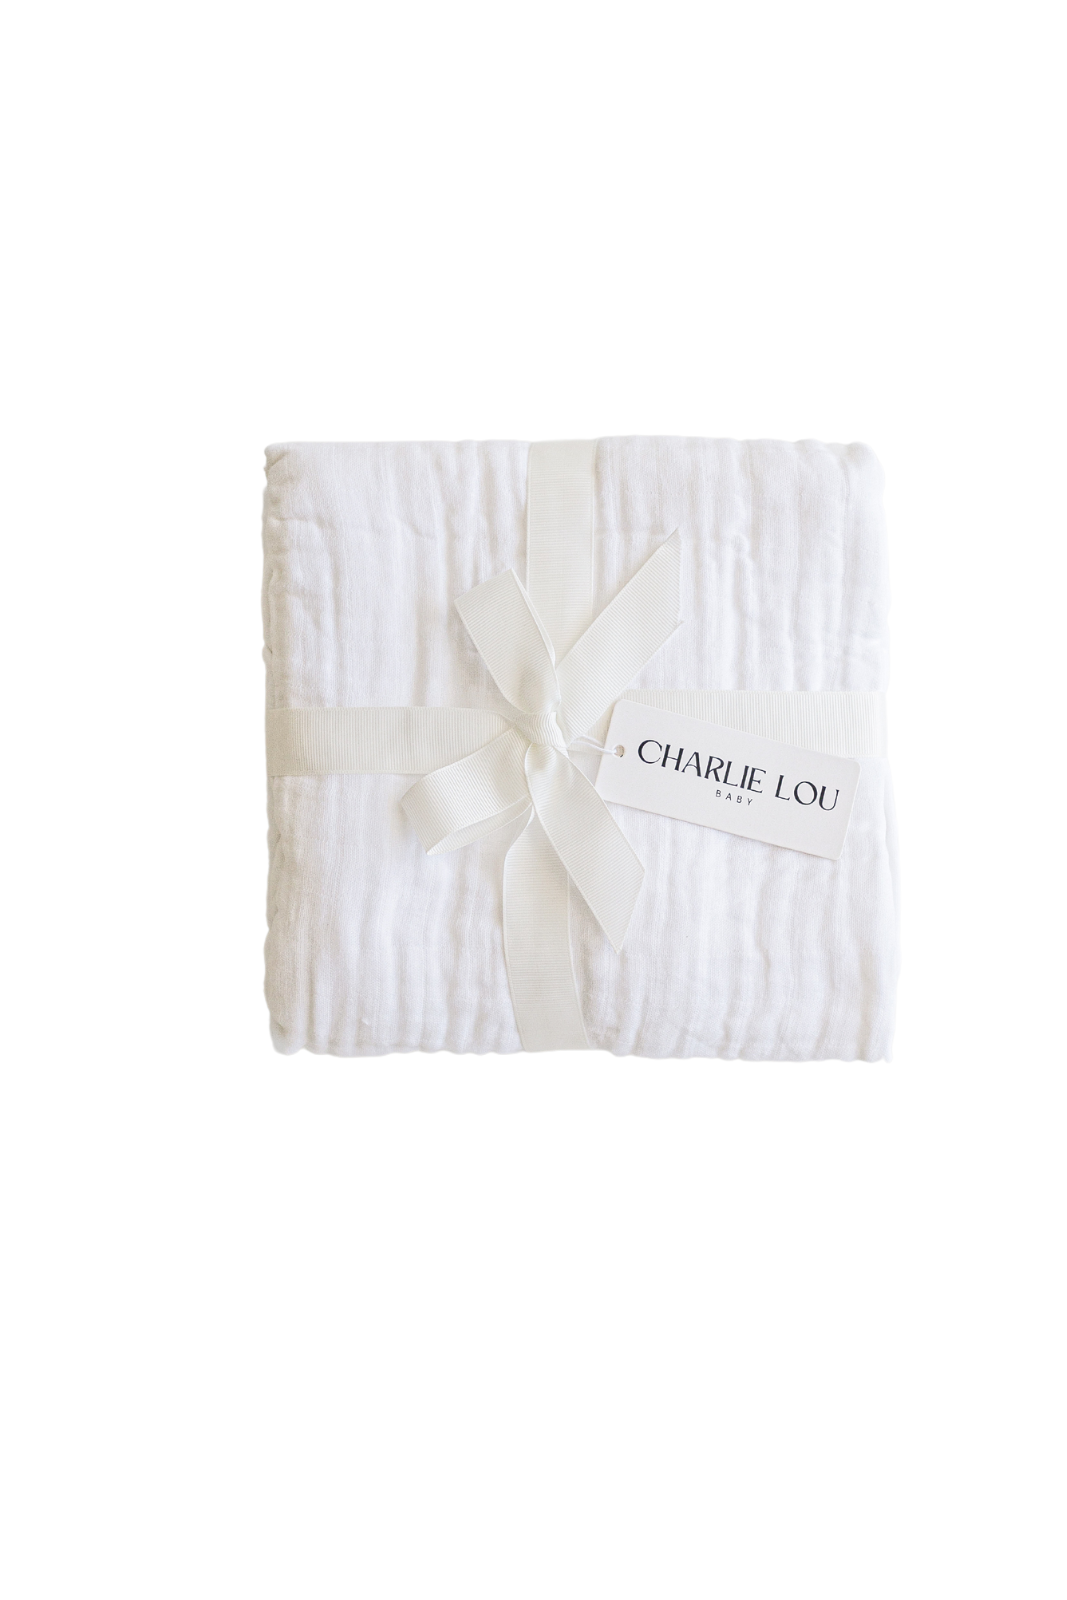 White 100% cotton muslin quilt, blanket or towel for baby girls, baby boys or toddlers.